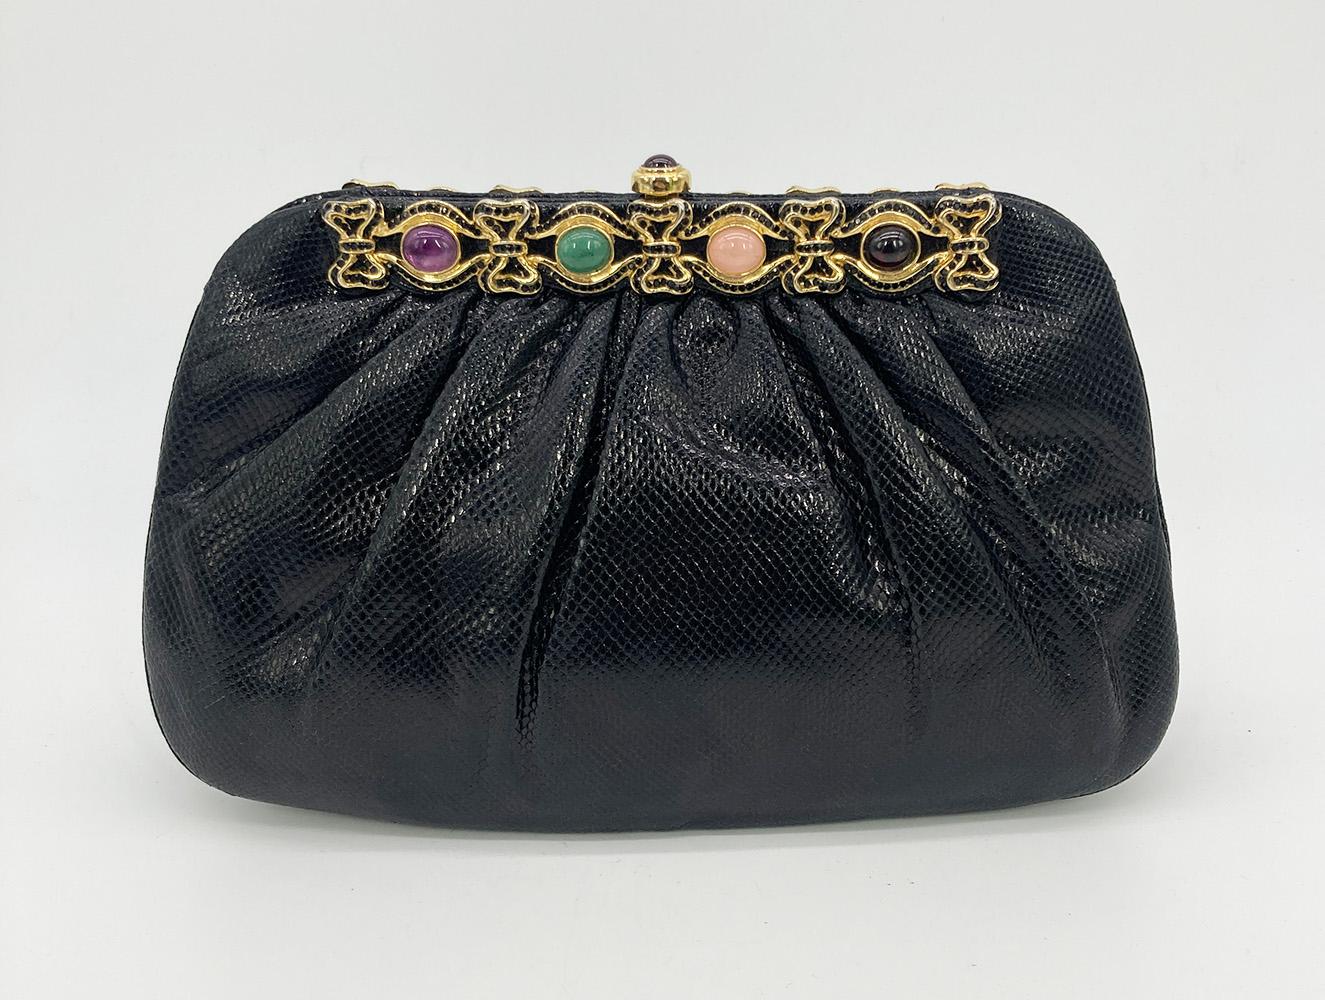 Judith Leiber Black Lizard Black Crystal Multi Color Gemstone Clutch in good condition. Black lizard exterior trimmed with gold hardware, black crystals and multi color gemstones along top edges. Top button closure opens to a black nylon interior